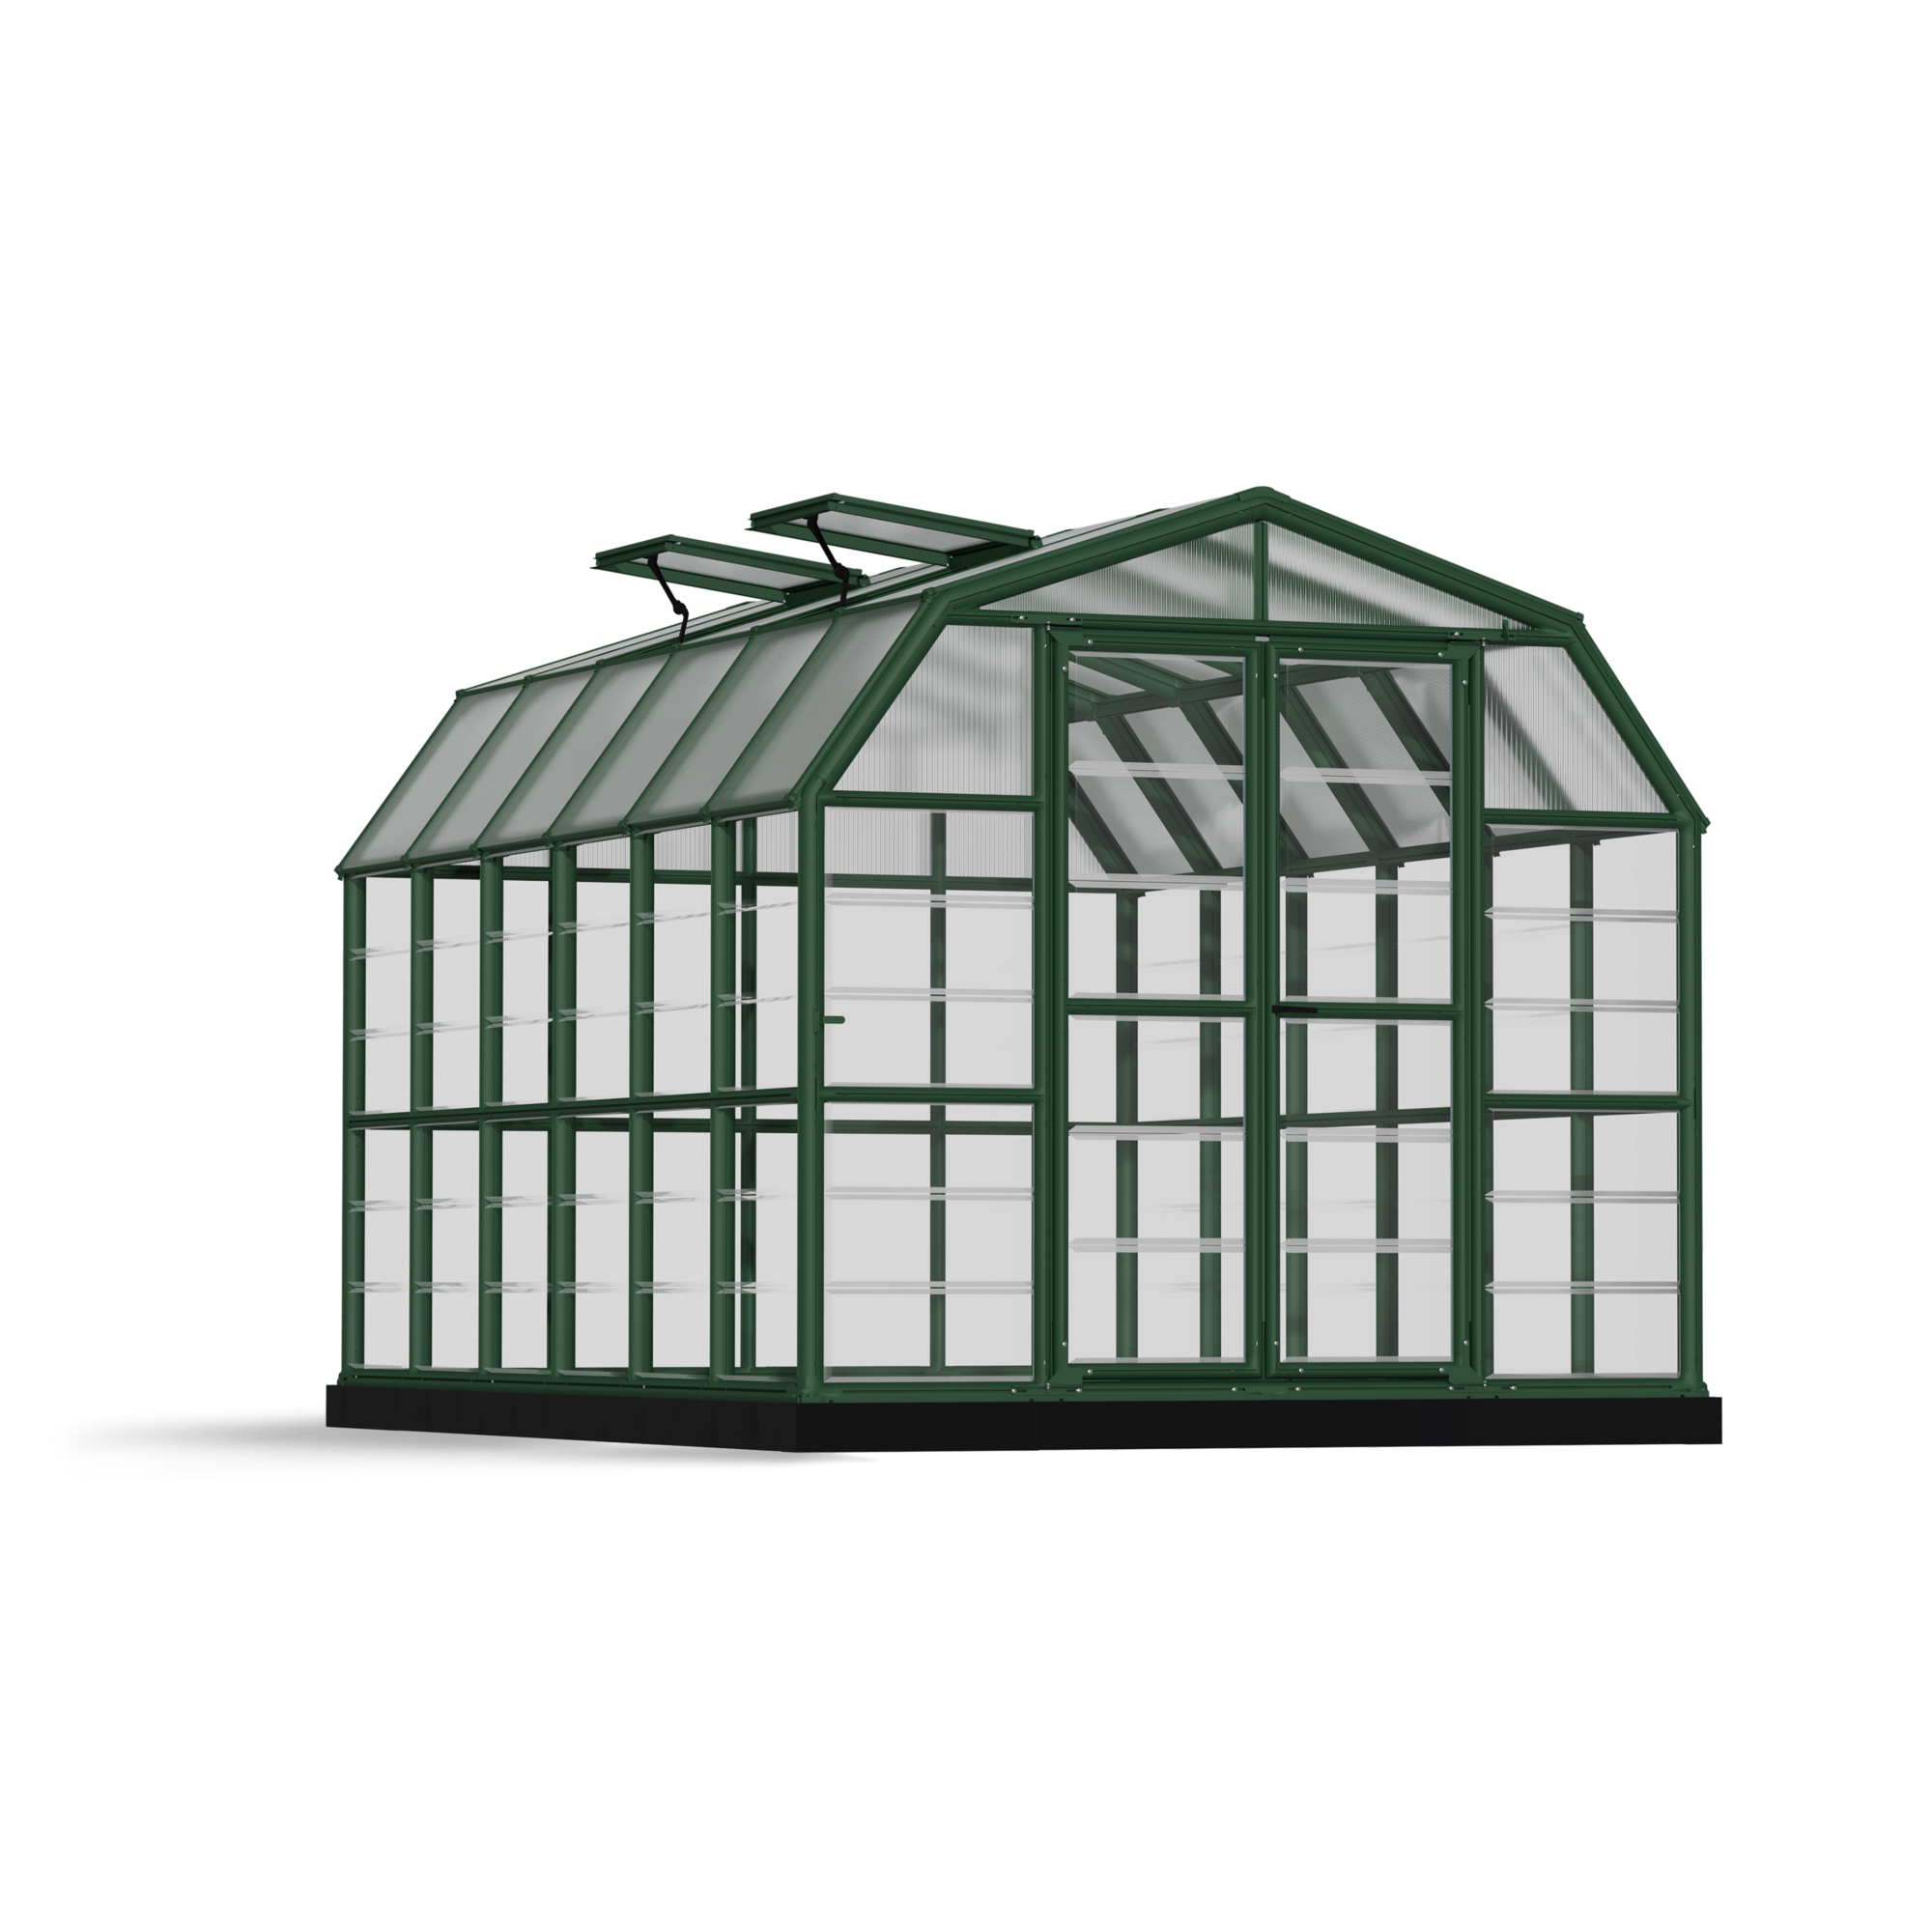 Poly-Tex Inc., Grand Gardener 8ft. x 12ft. Greenhouse - Clear, Length 153.1 in, Width 105.1 in, Center Height 93.5 in, Model 702493